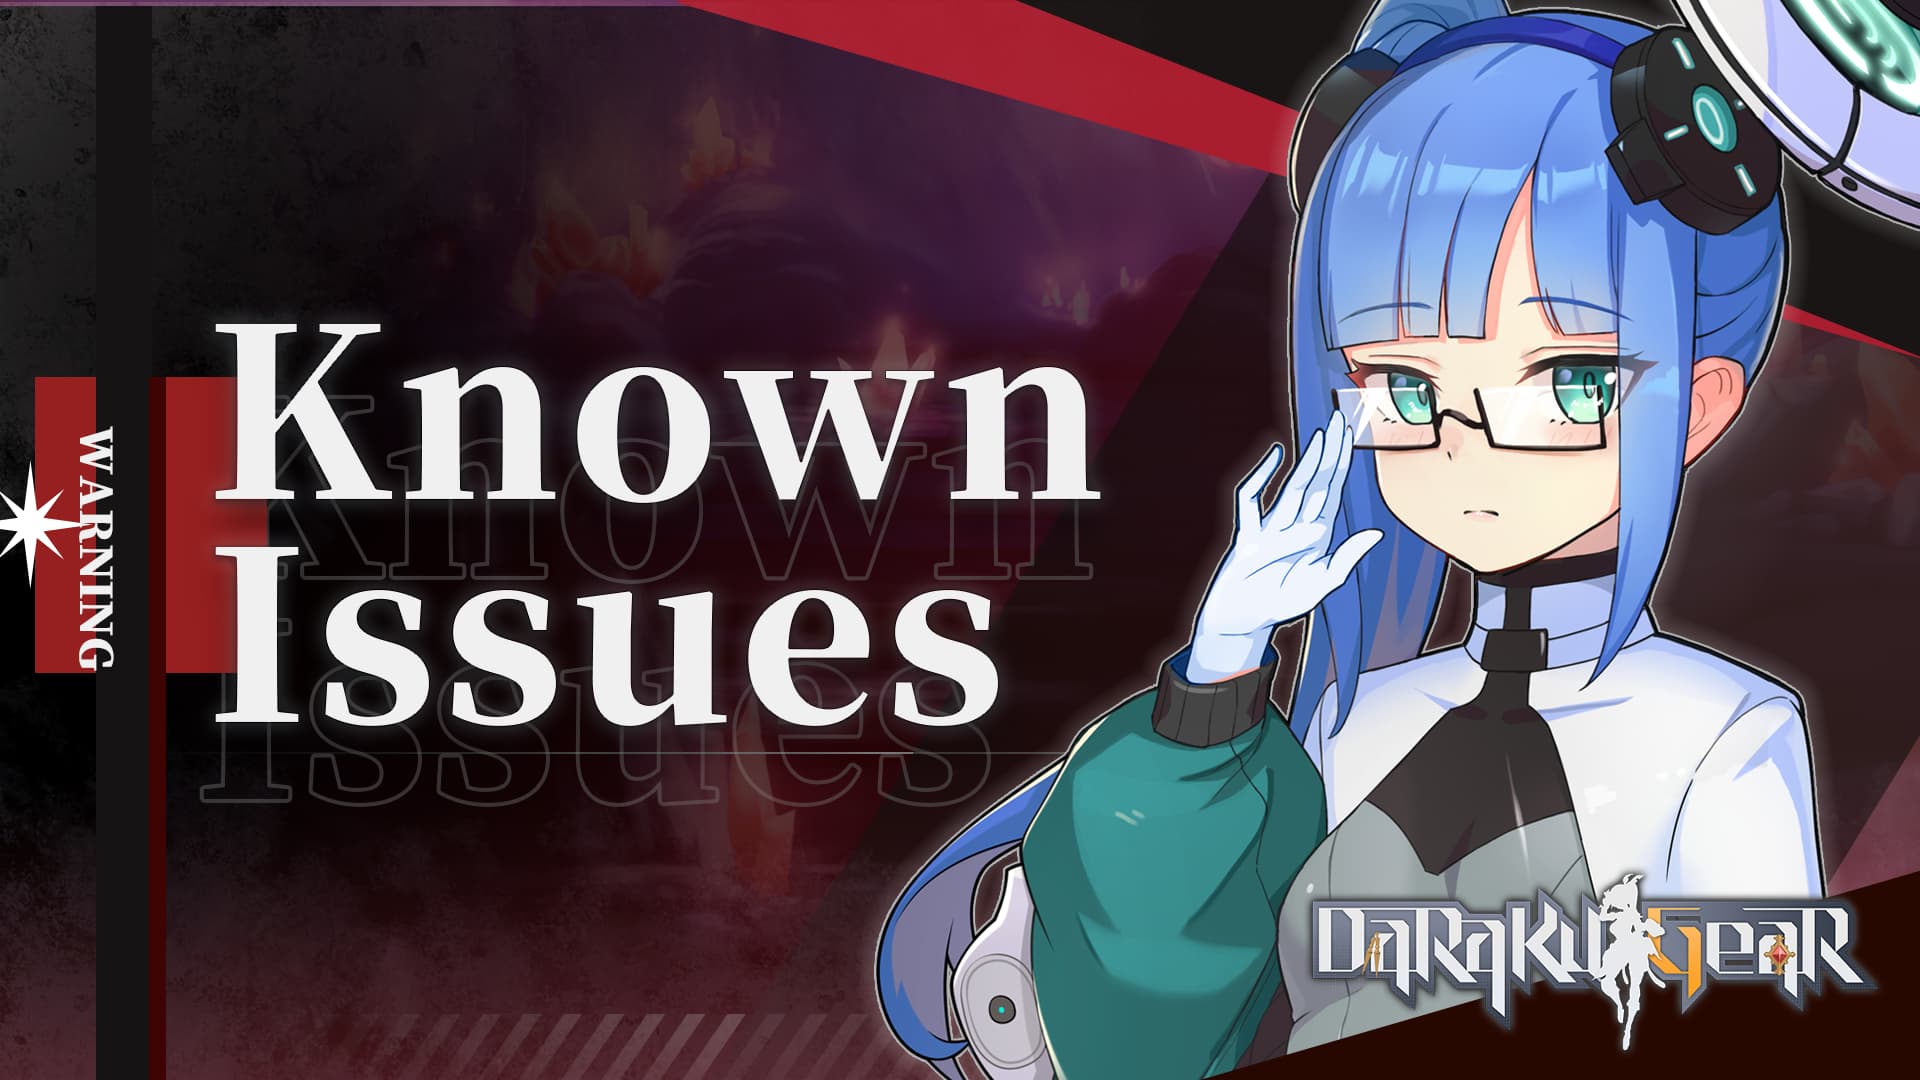 06/27 Known issues